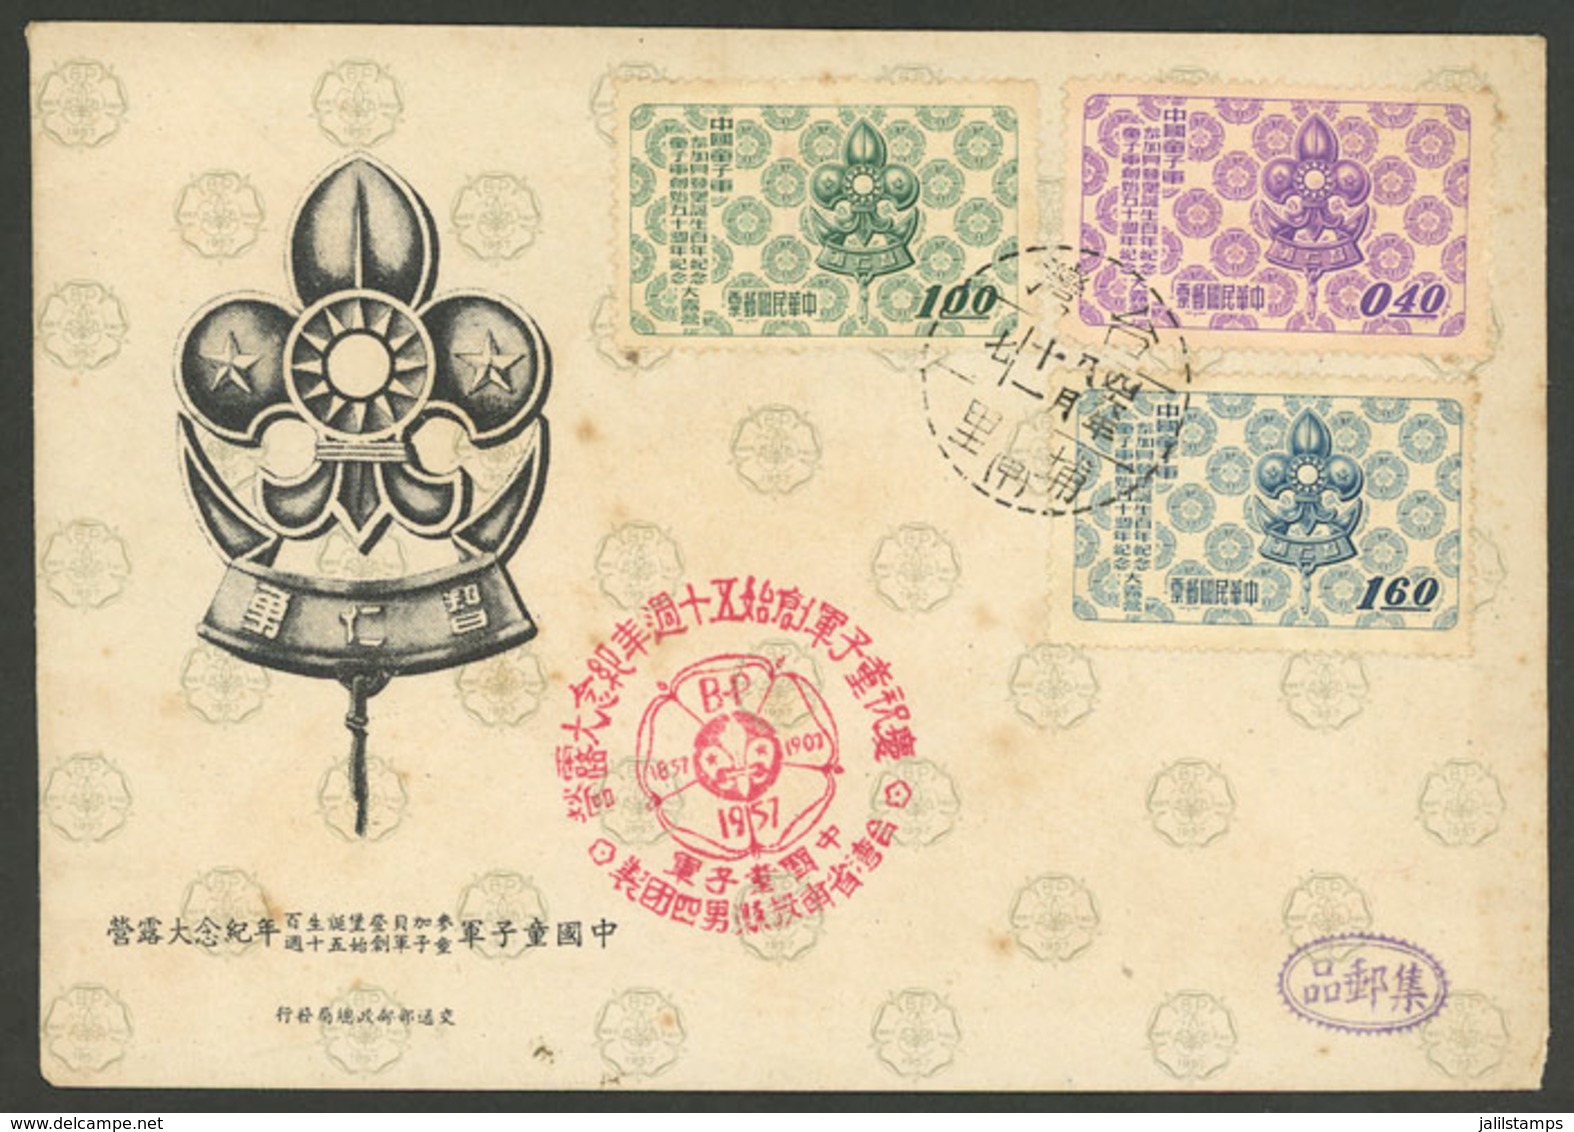 CHINA - TAIWAN: SCOUTS Issue Of 1957 On A FDC Cover, Very Nice! - FDC